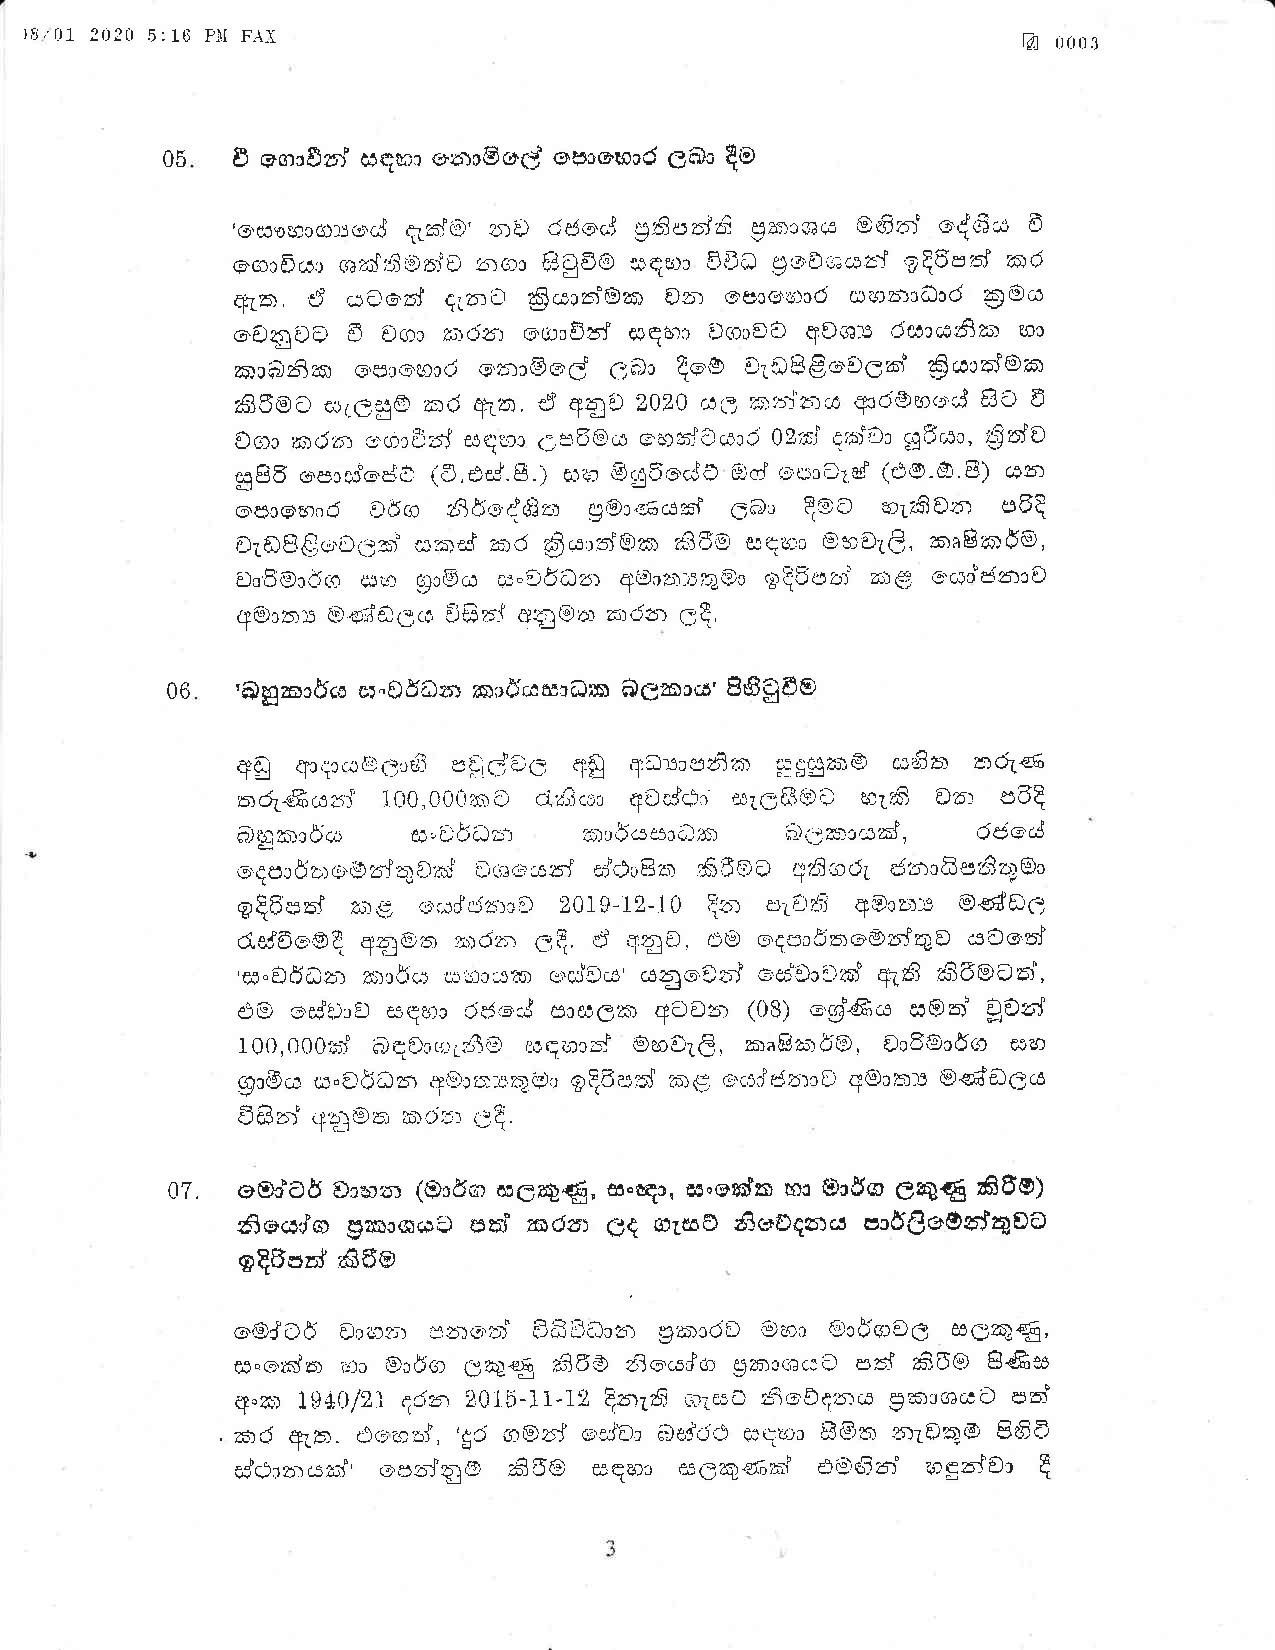 Cabinet Decision on 08.01.2020 page 003